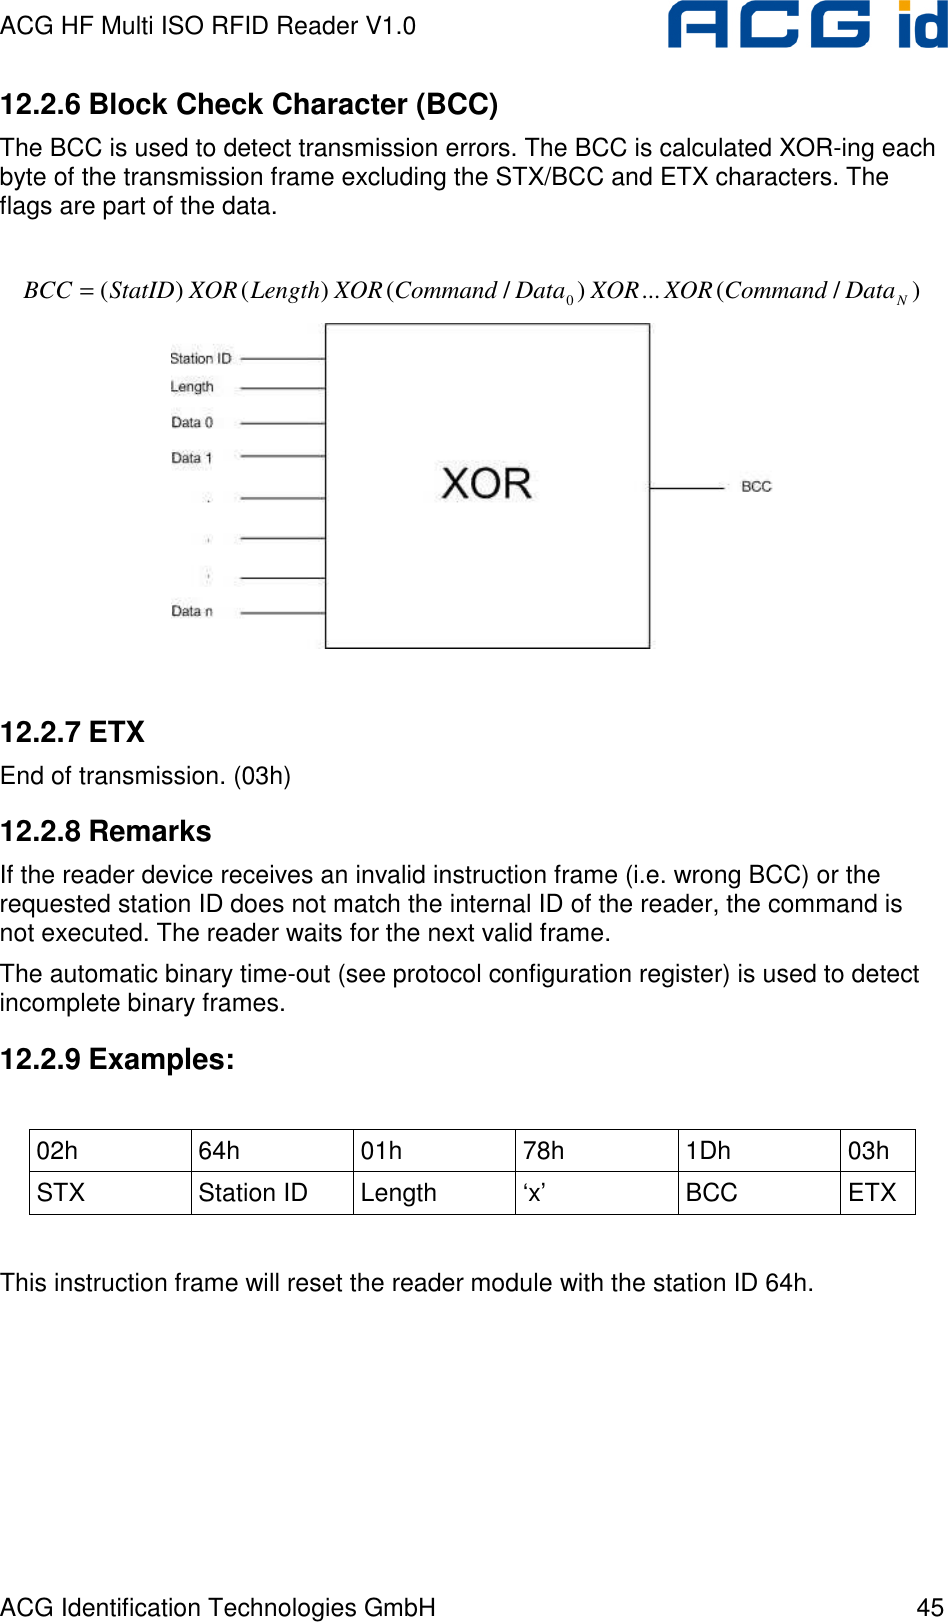 ACG HF Multi ISO RFID Reader V1.0 ACG Identification Technologies GmbH  45 12.2.6 Block Check Character (BCC) The BCC is used to detect transmission errors. The BCC is calculated XOR-ing each byte of the transmission frame excluding the STX/BCC and ETX characters. The flags are part of the data.  )/(...)/()()( 0NDataCommandXORXORDataCommandXORLengthXORStatIDBCC =   12.2.7 ETX End of transmission. (03h) 12.2.8 Remarks If the reader device receives an invalid instruction frame (i.e. wrong BCC) or the requested station ID does not match the internal ID of the reader, the command is not executed. The reader waits for the next valid frame. The automatic binary time-out (see protocol configuration register) is used to detect incomplete binary frames. 12.2.9 Examples:  02h  64h  01h  78h  1Dh  03h STX  Station ID  Length  ‘x’  BCC  ETX  This instruction frame will reset the reader module with the station ID 64h. 